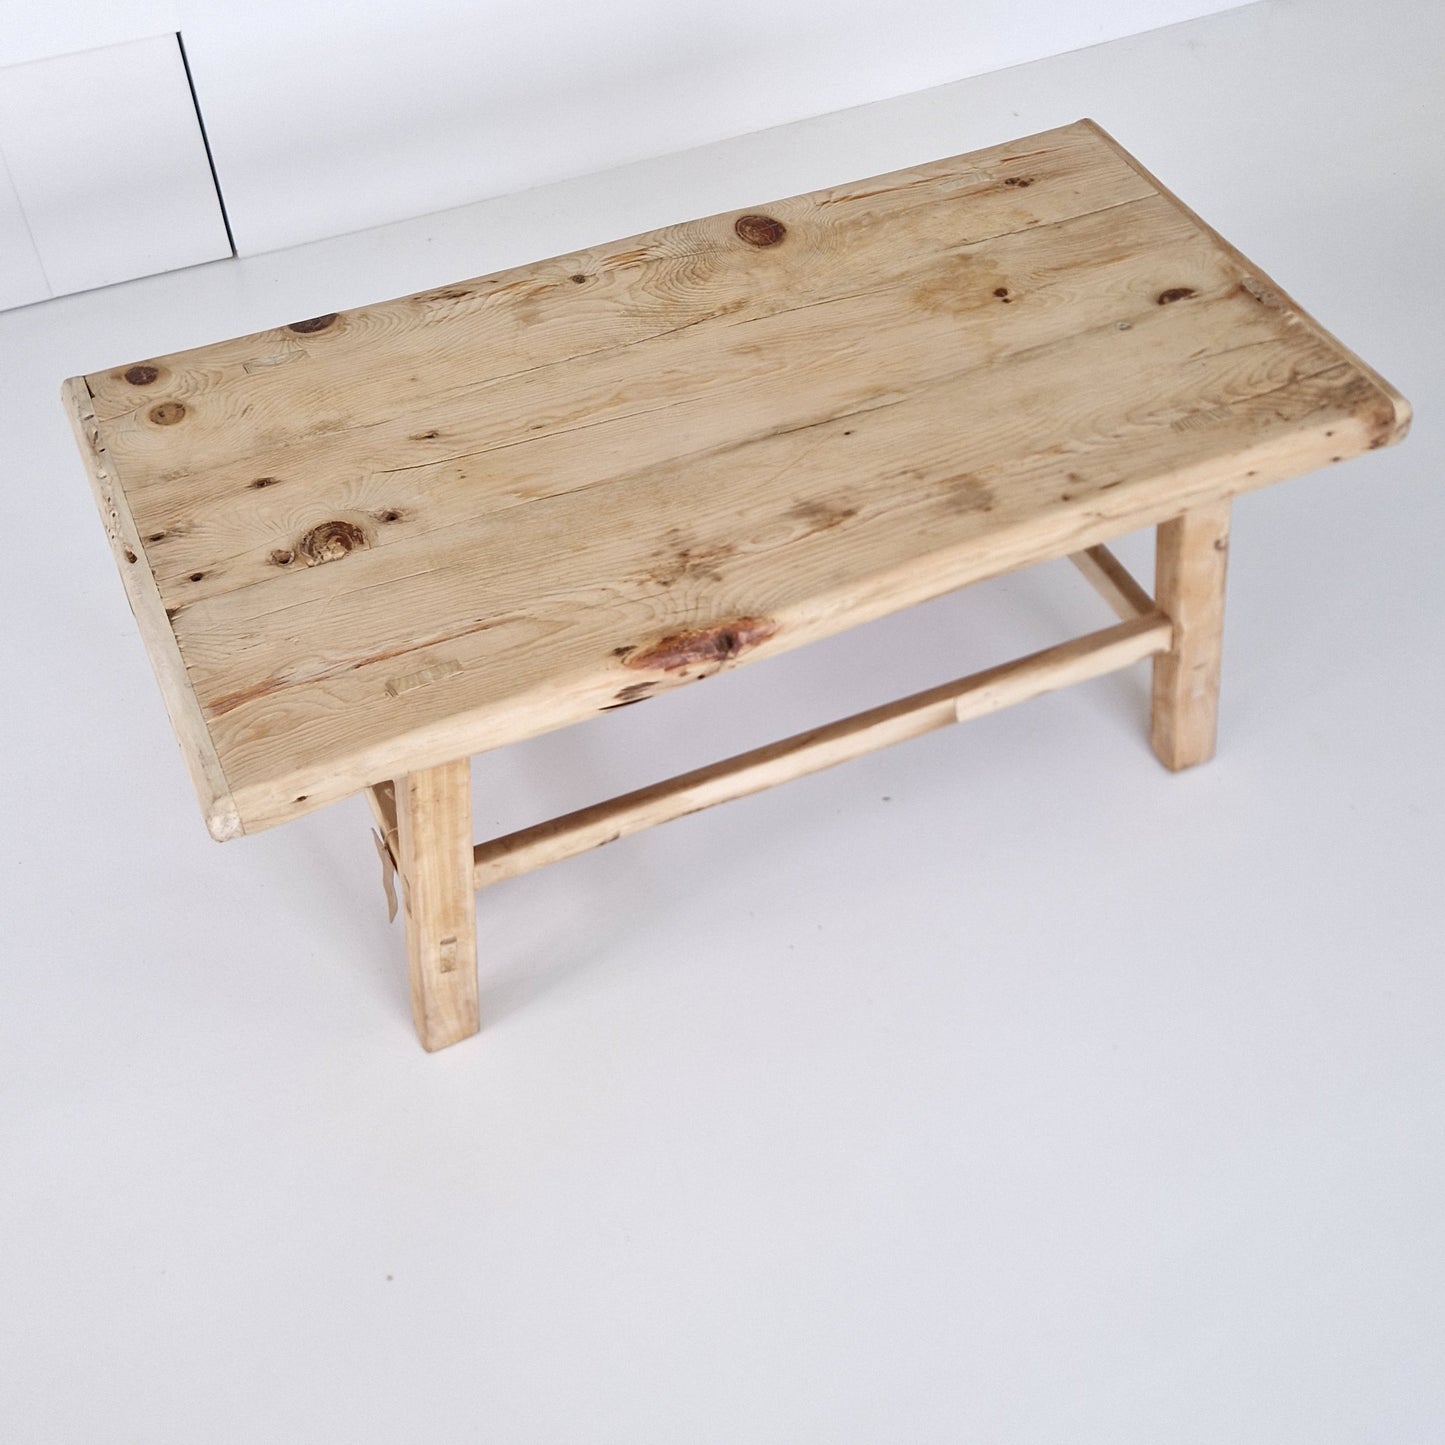 Chinese old wooden table #1 1 (101x50x41,5)